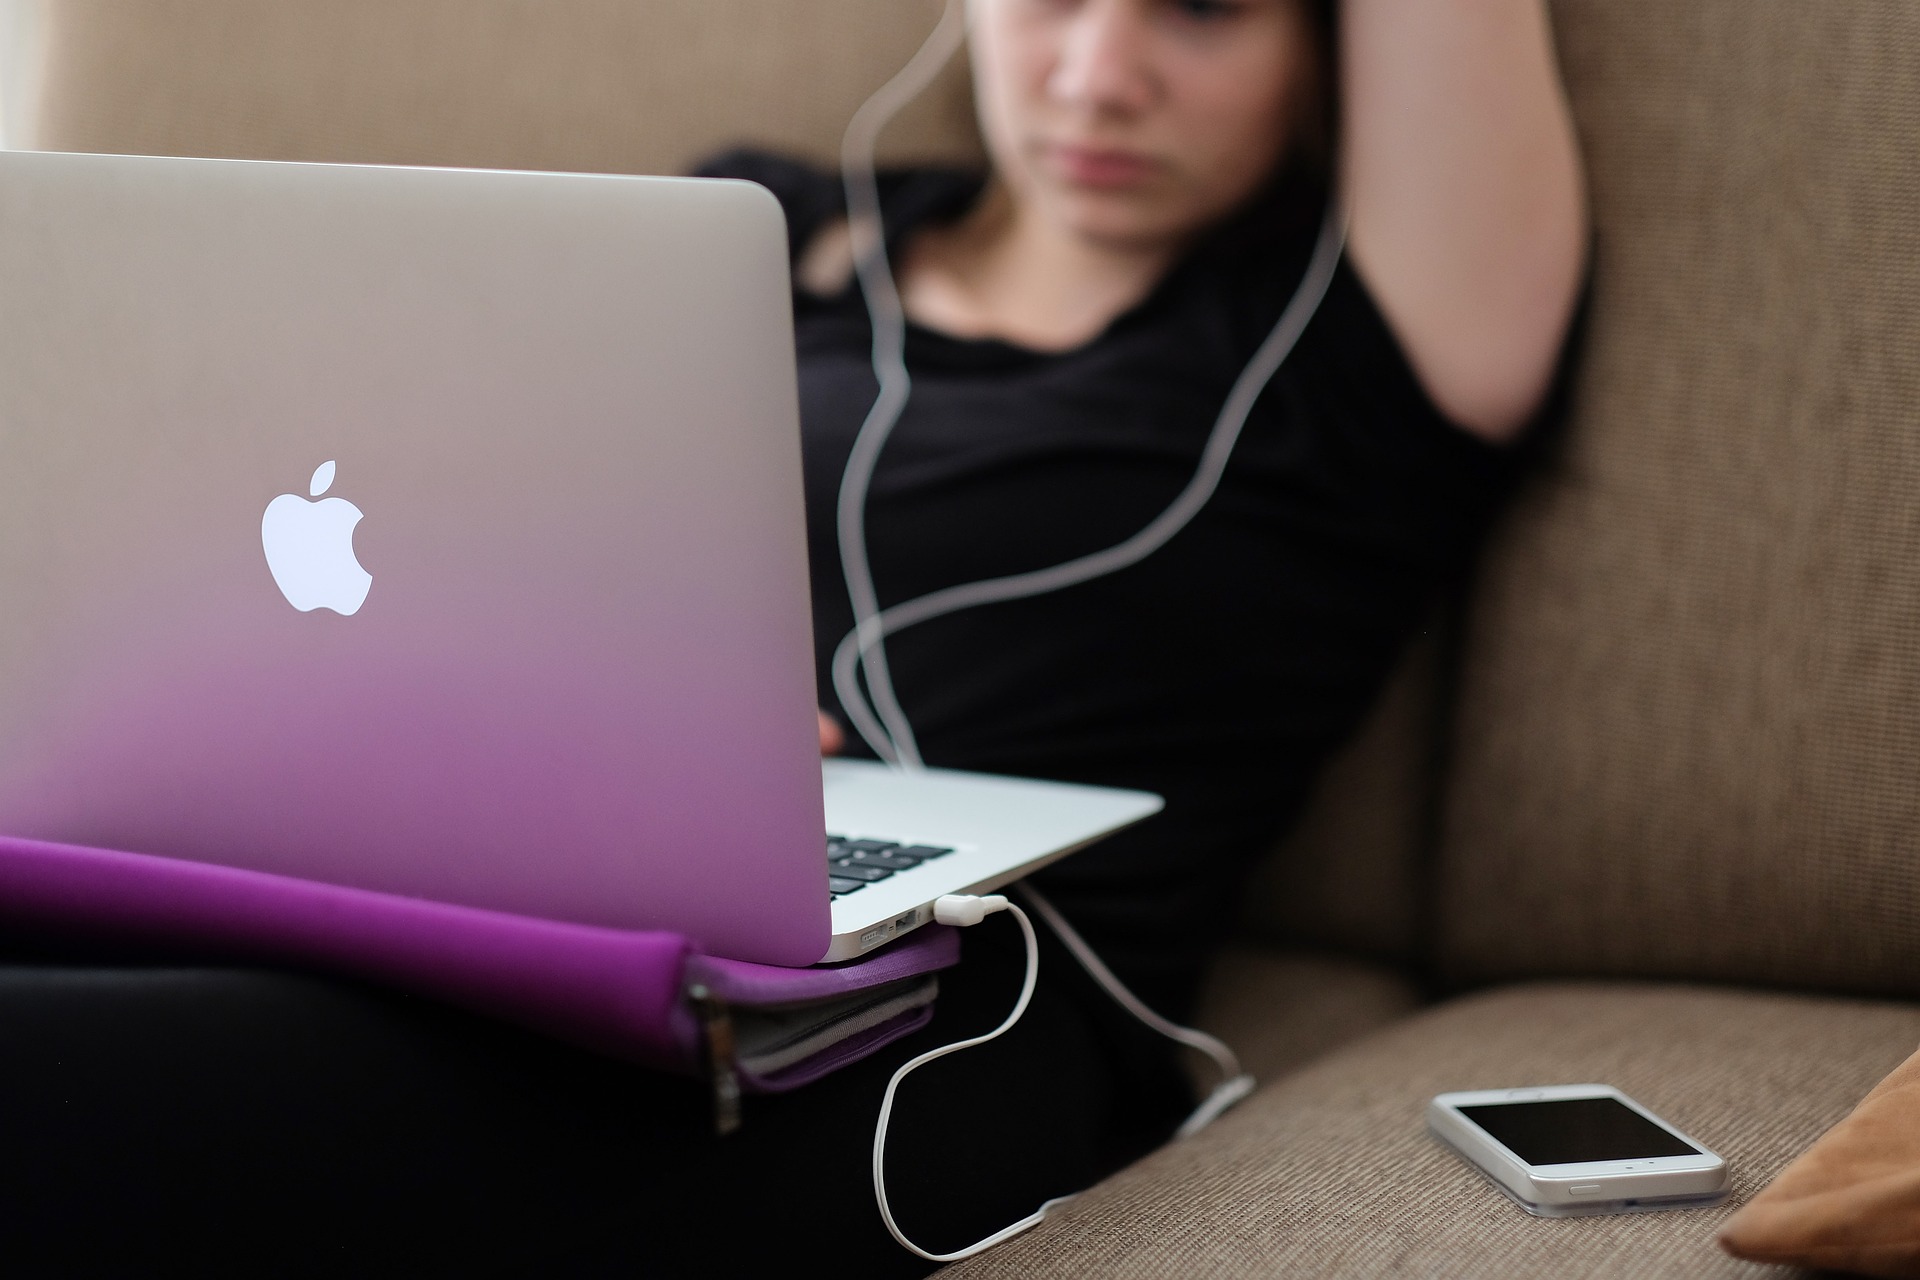 A young woman slouched on a sofa working on an Apple laptop with headphones in and a phone by her side.